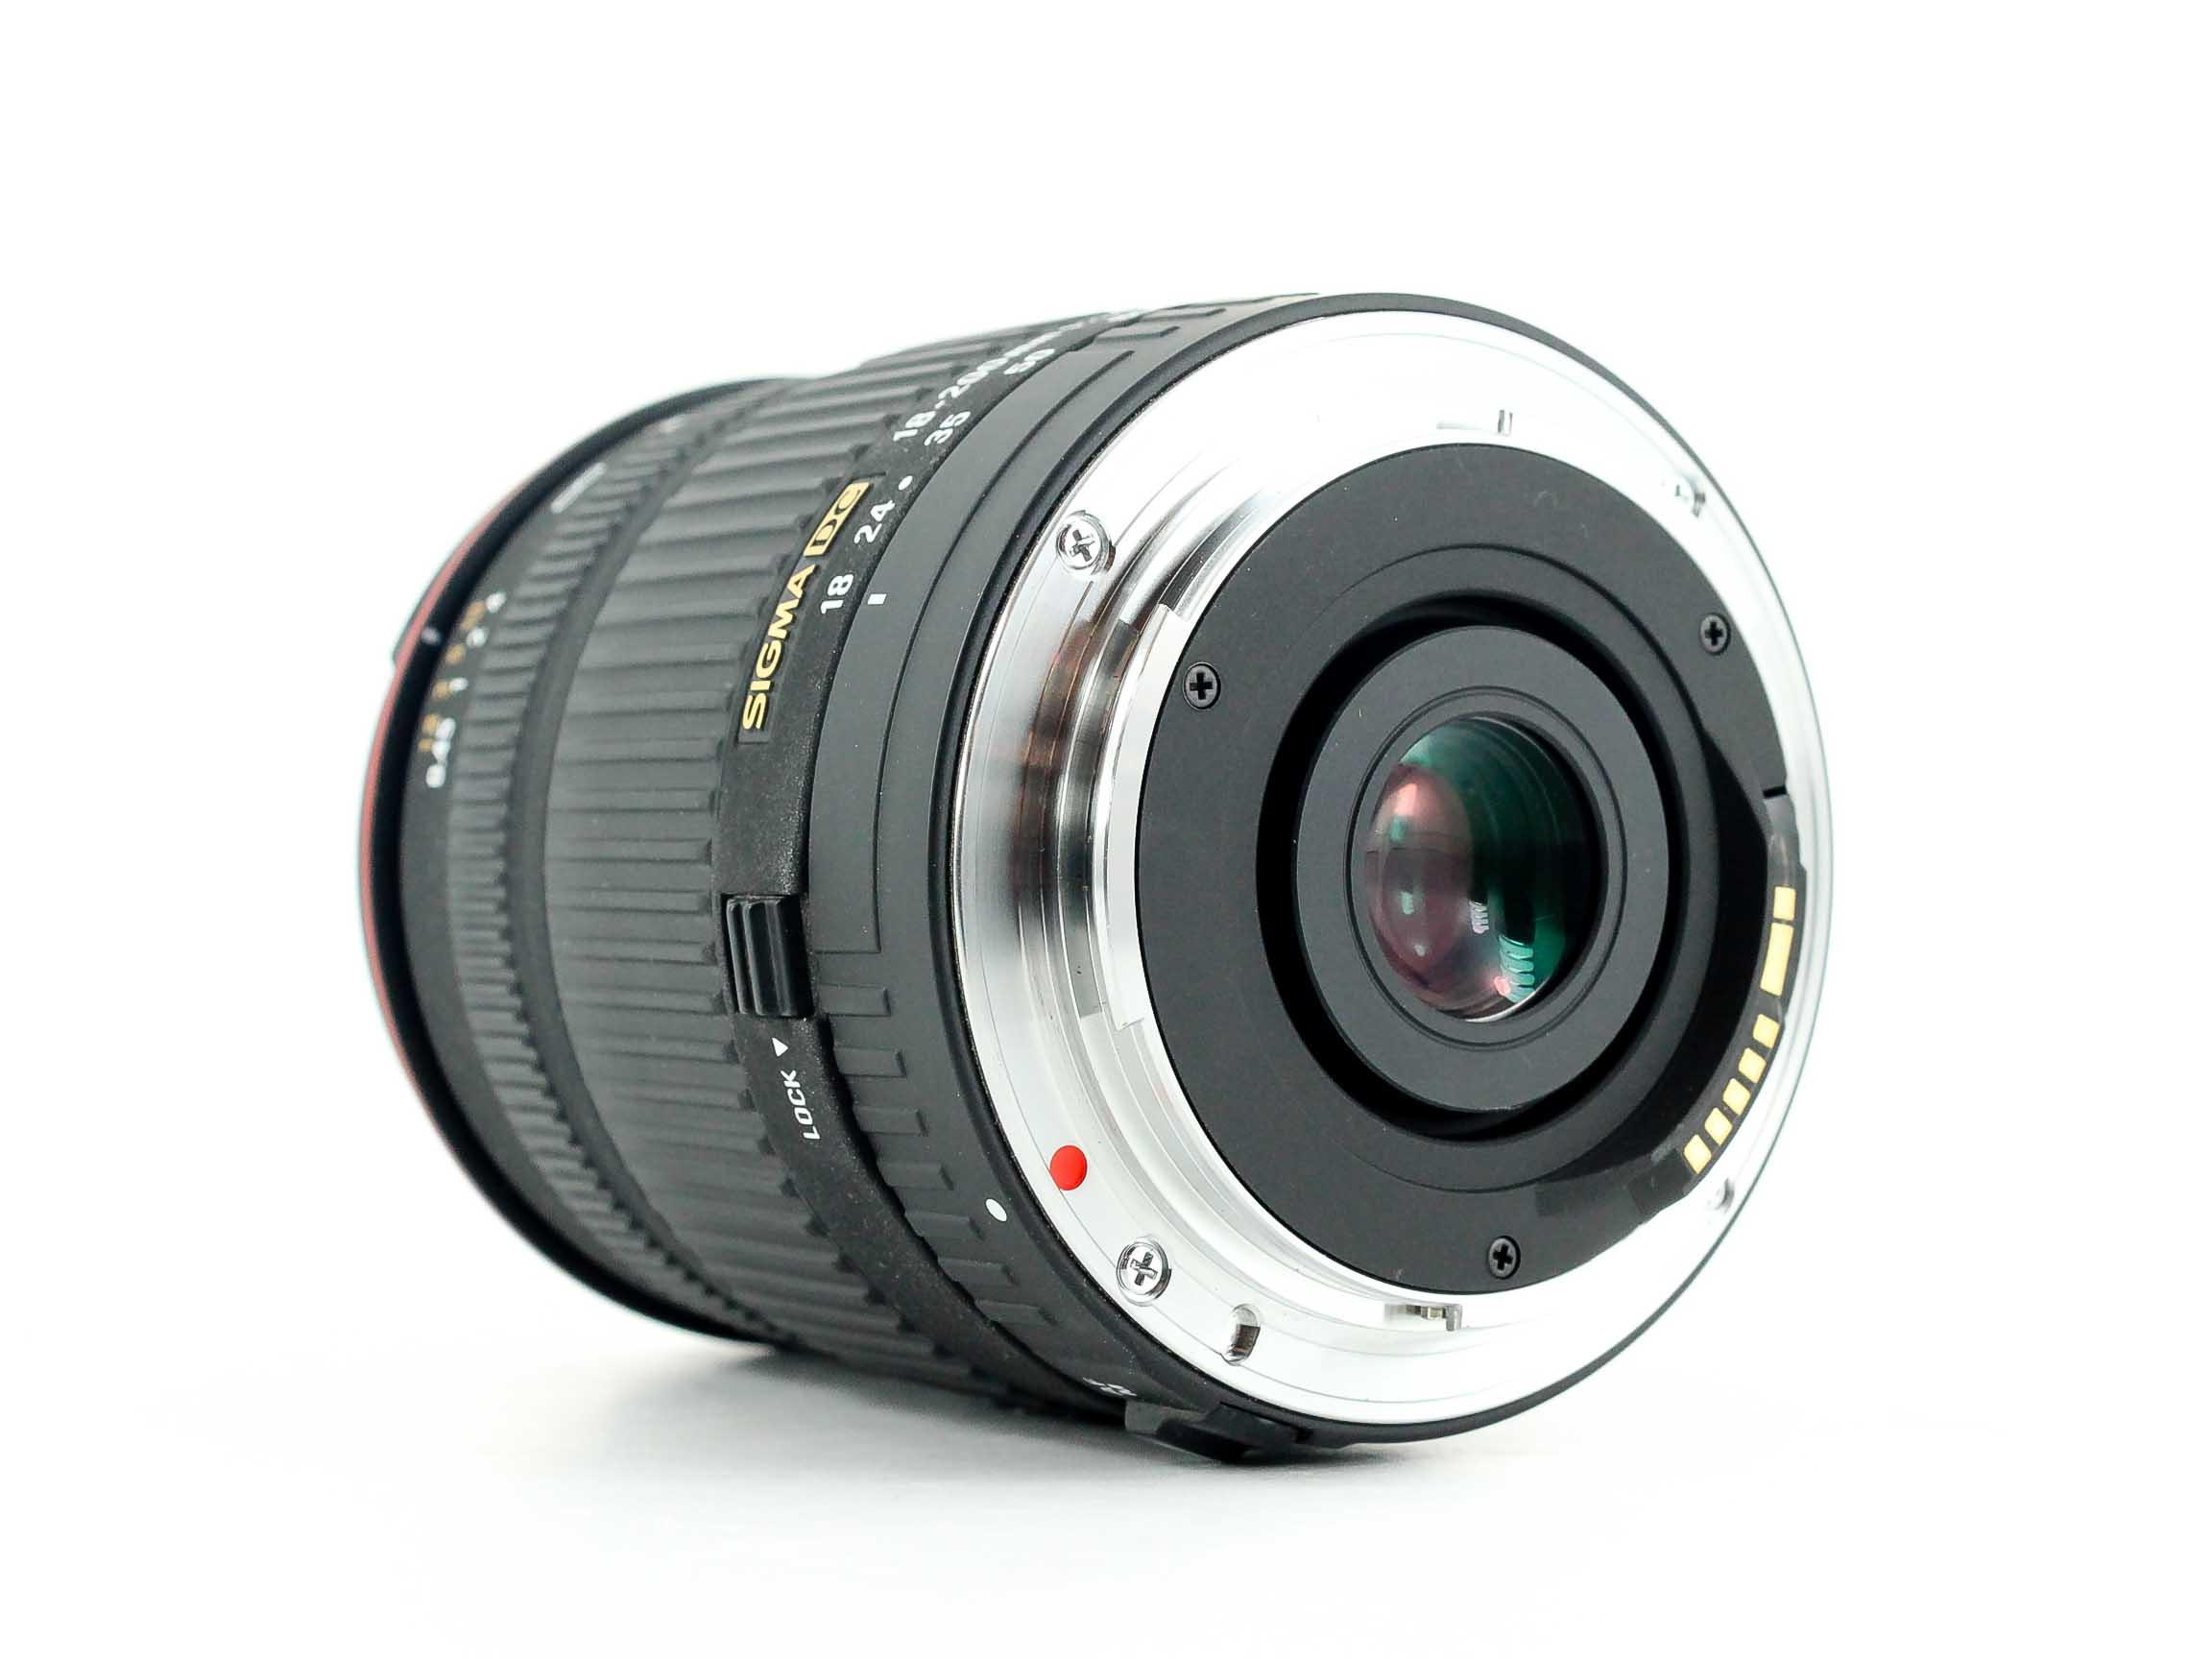 Sigma 18-200mm f/3.5-6.3 DC Canon EF-S Lens Lenses and Cameras